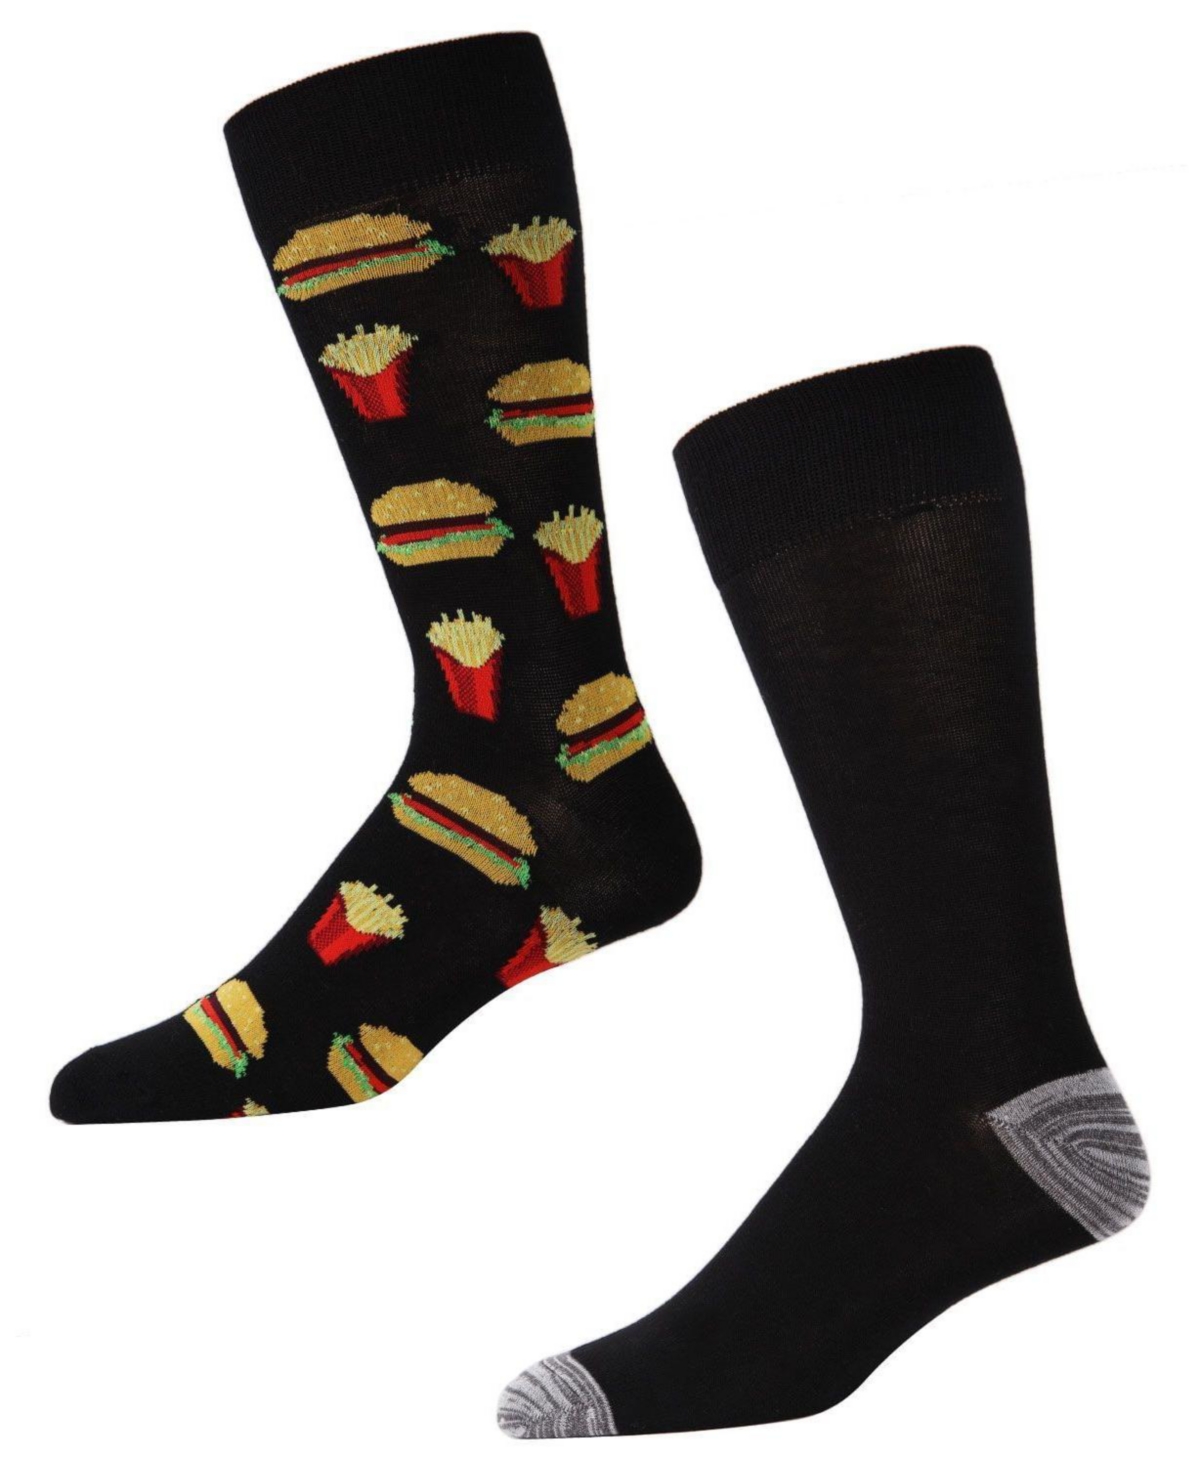 Men's Pizza Rayon From Bamboo Crew 2 Pair Pack Socks - Burger and Fries